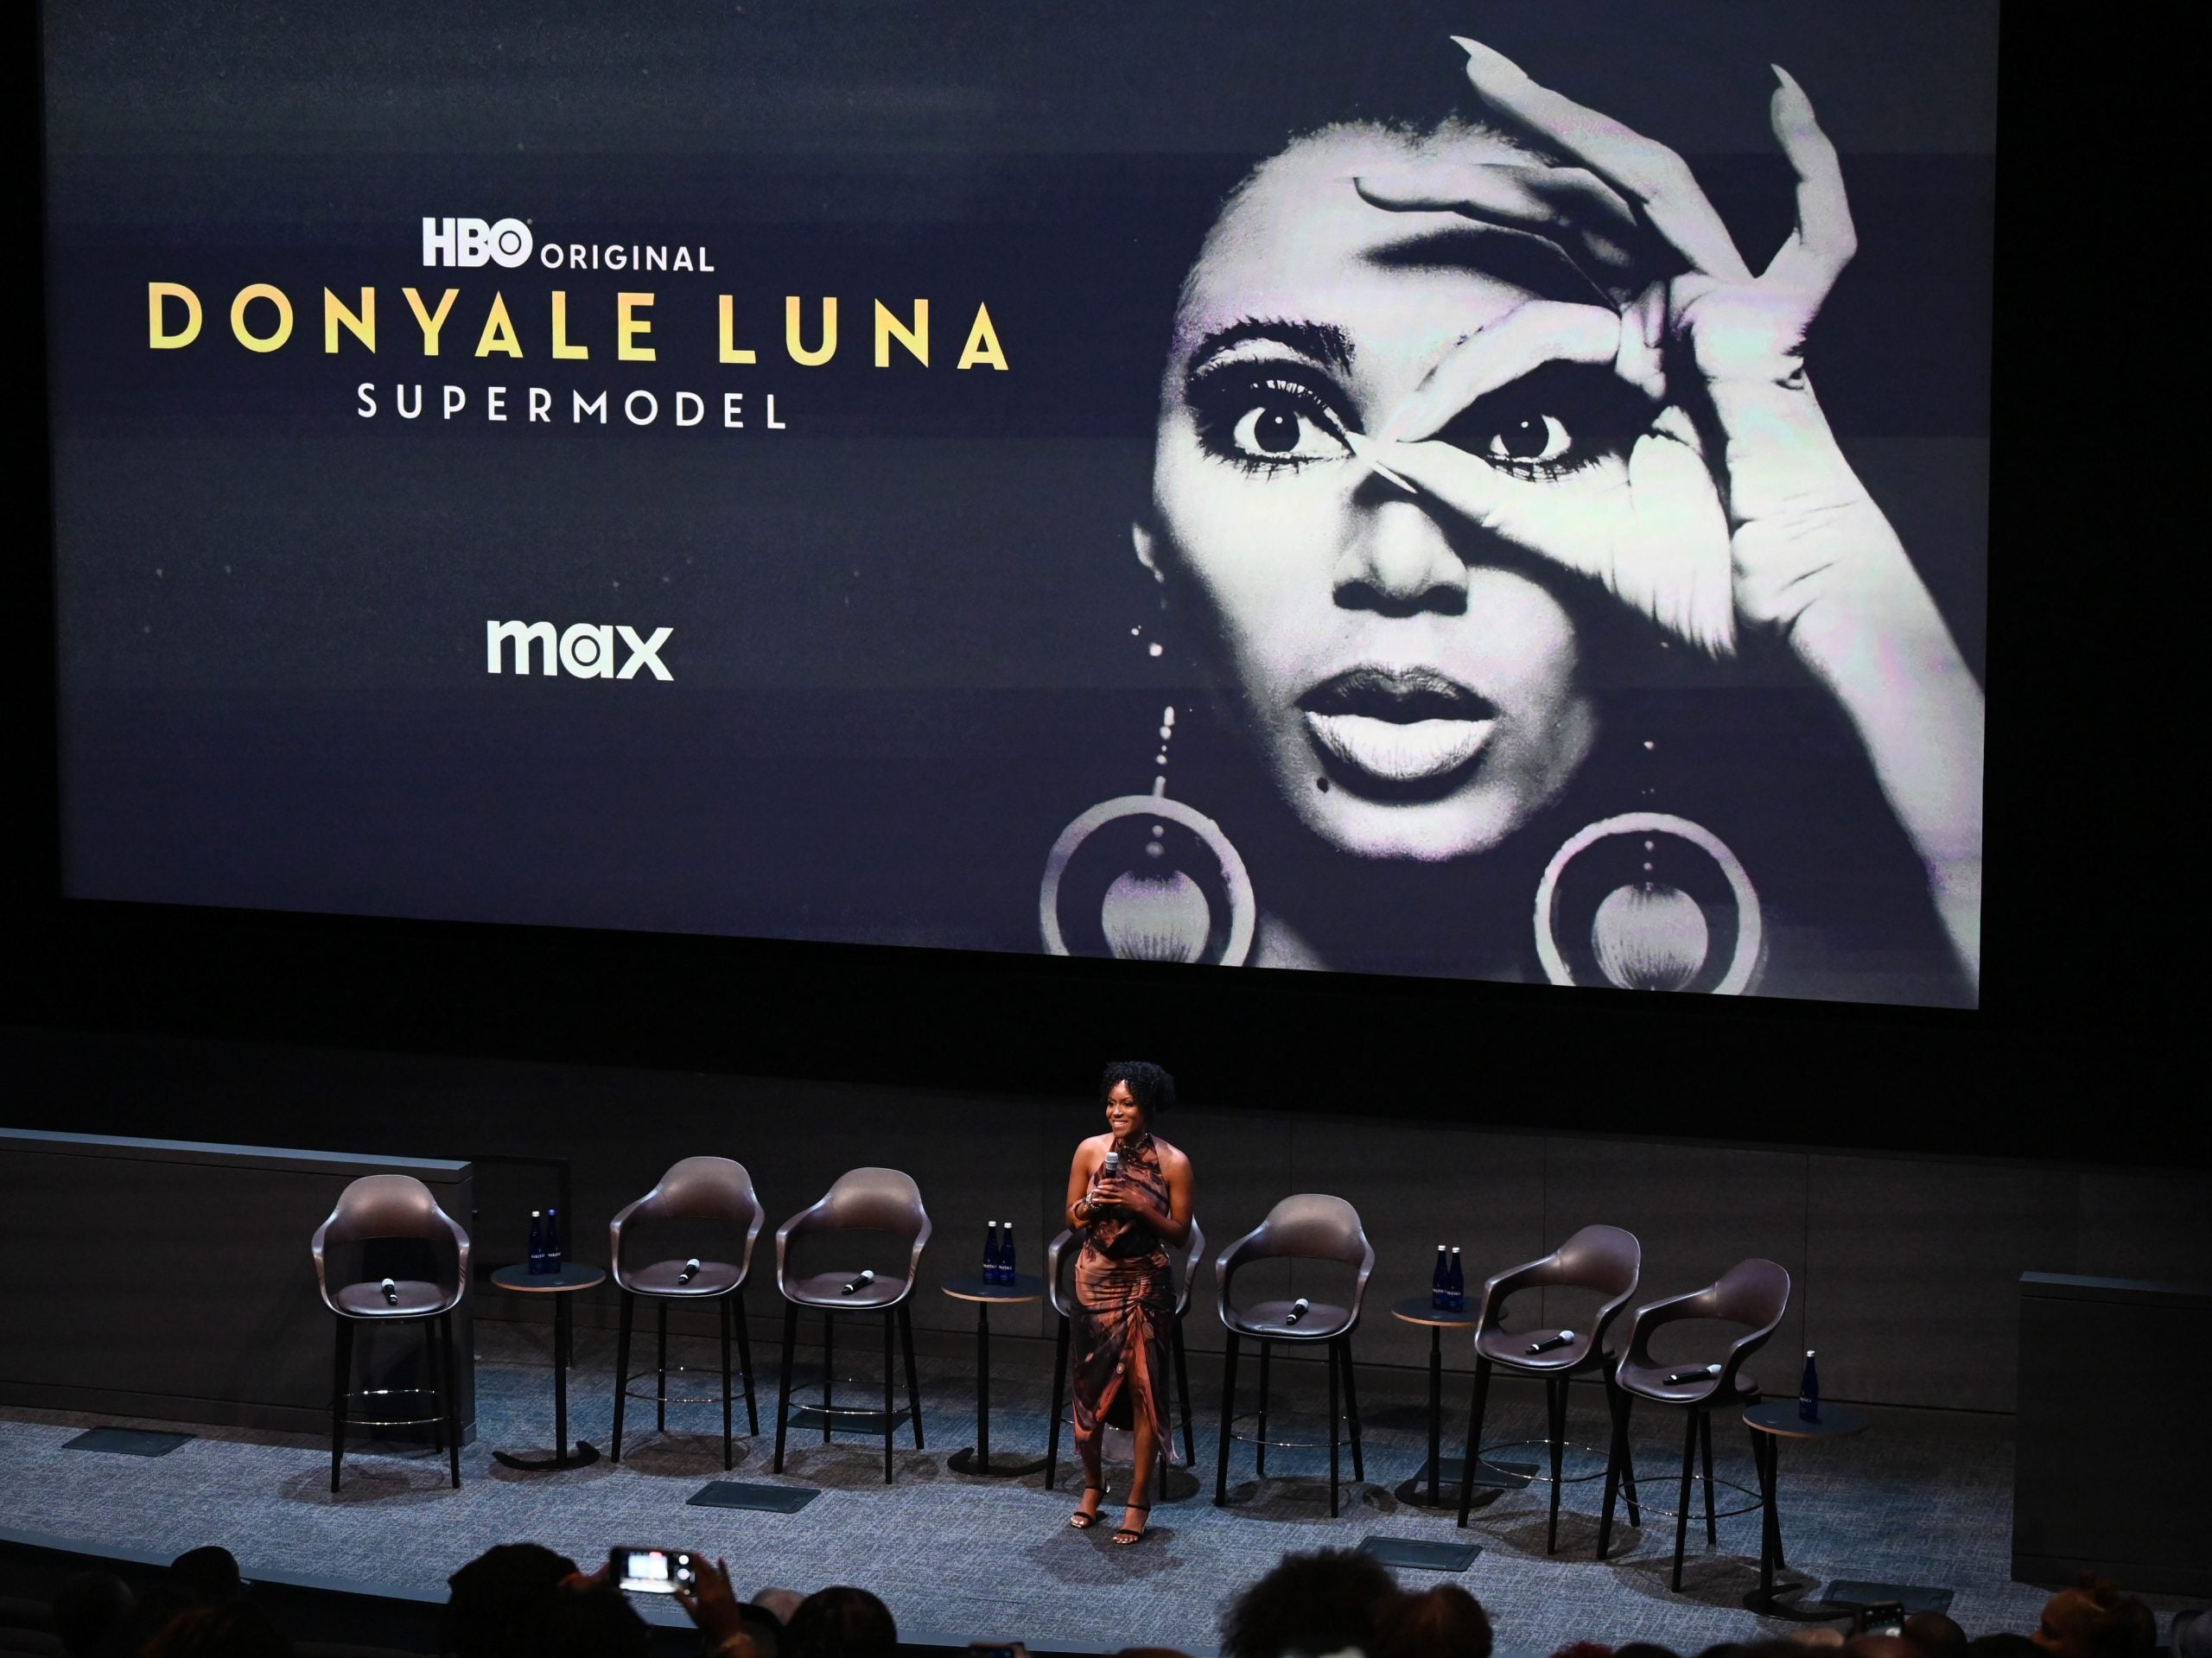 HBO’s Latest Documentary Sheds Light On Donyale Luna, The First Black Supermodel